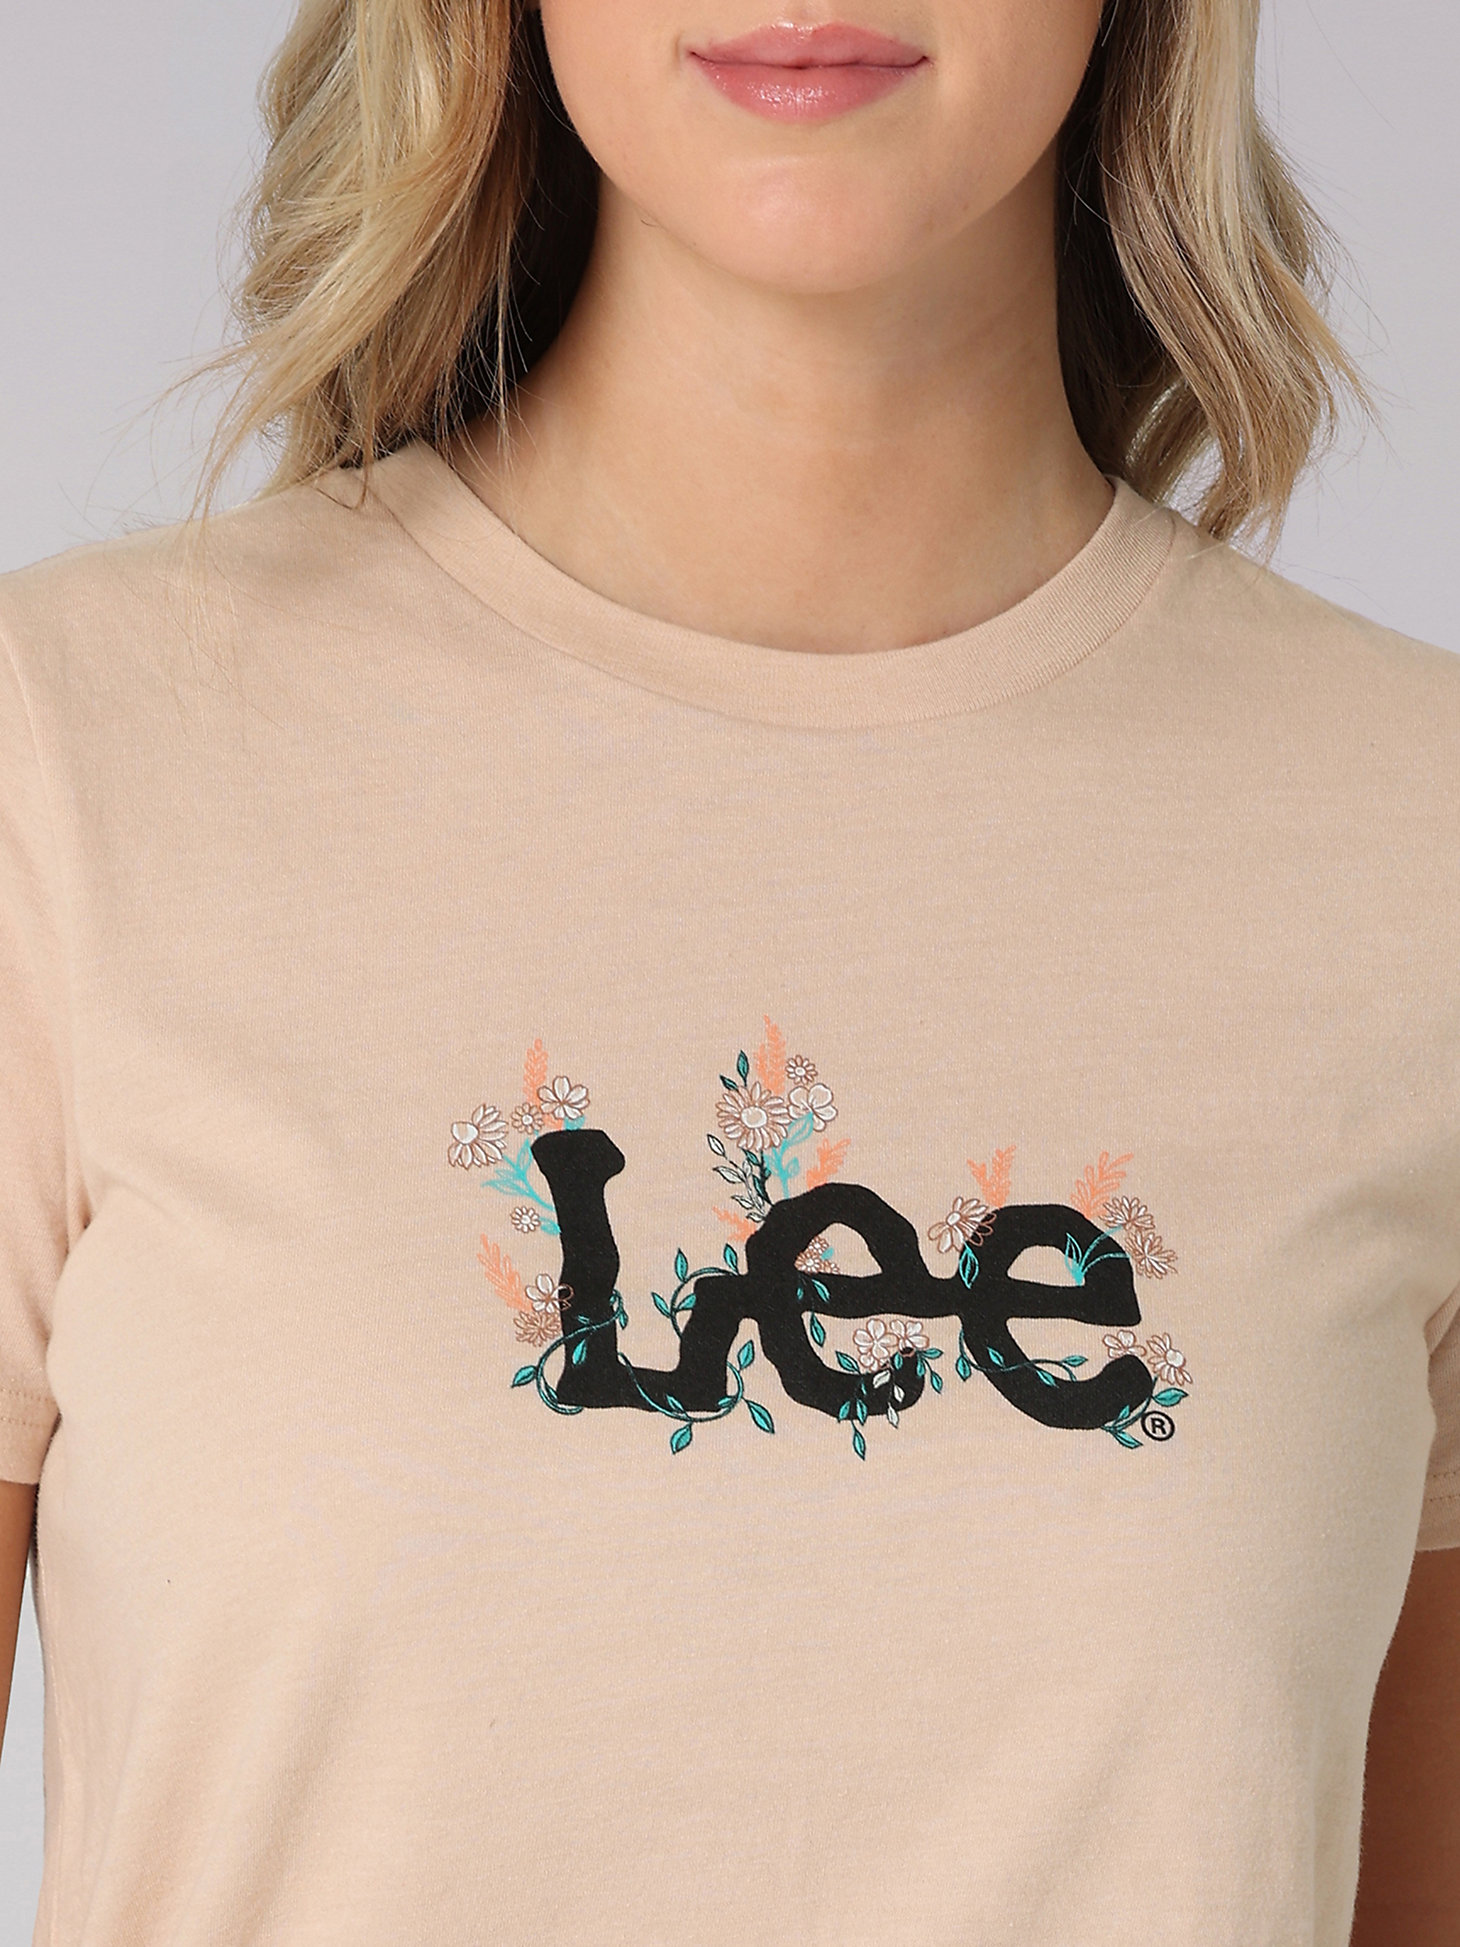 Women's Lee Floral Logo Tee in Peach Whip Heather alternative view 2